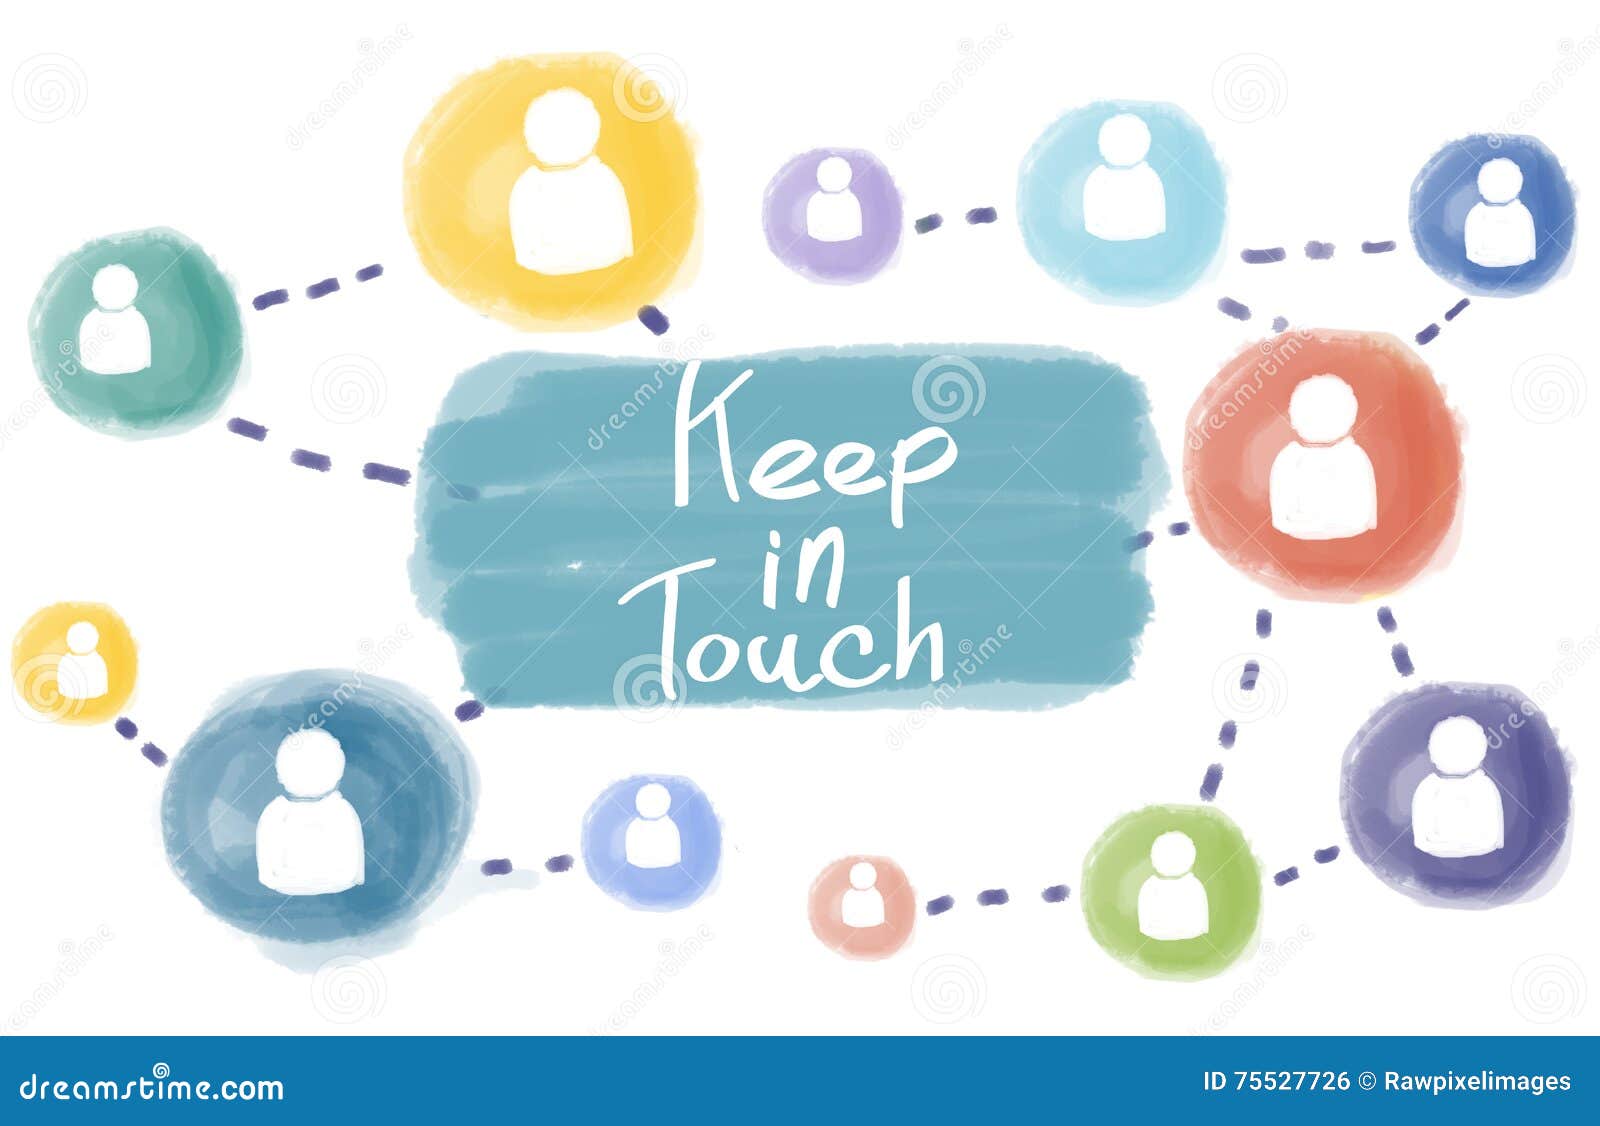 keep in touch connect follow social media follow concept